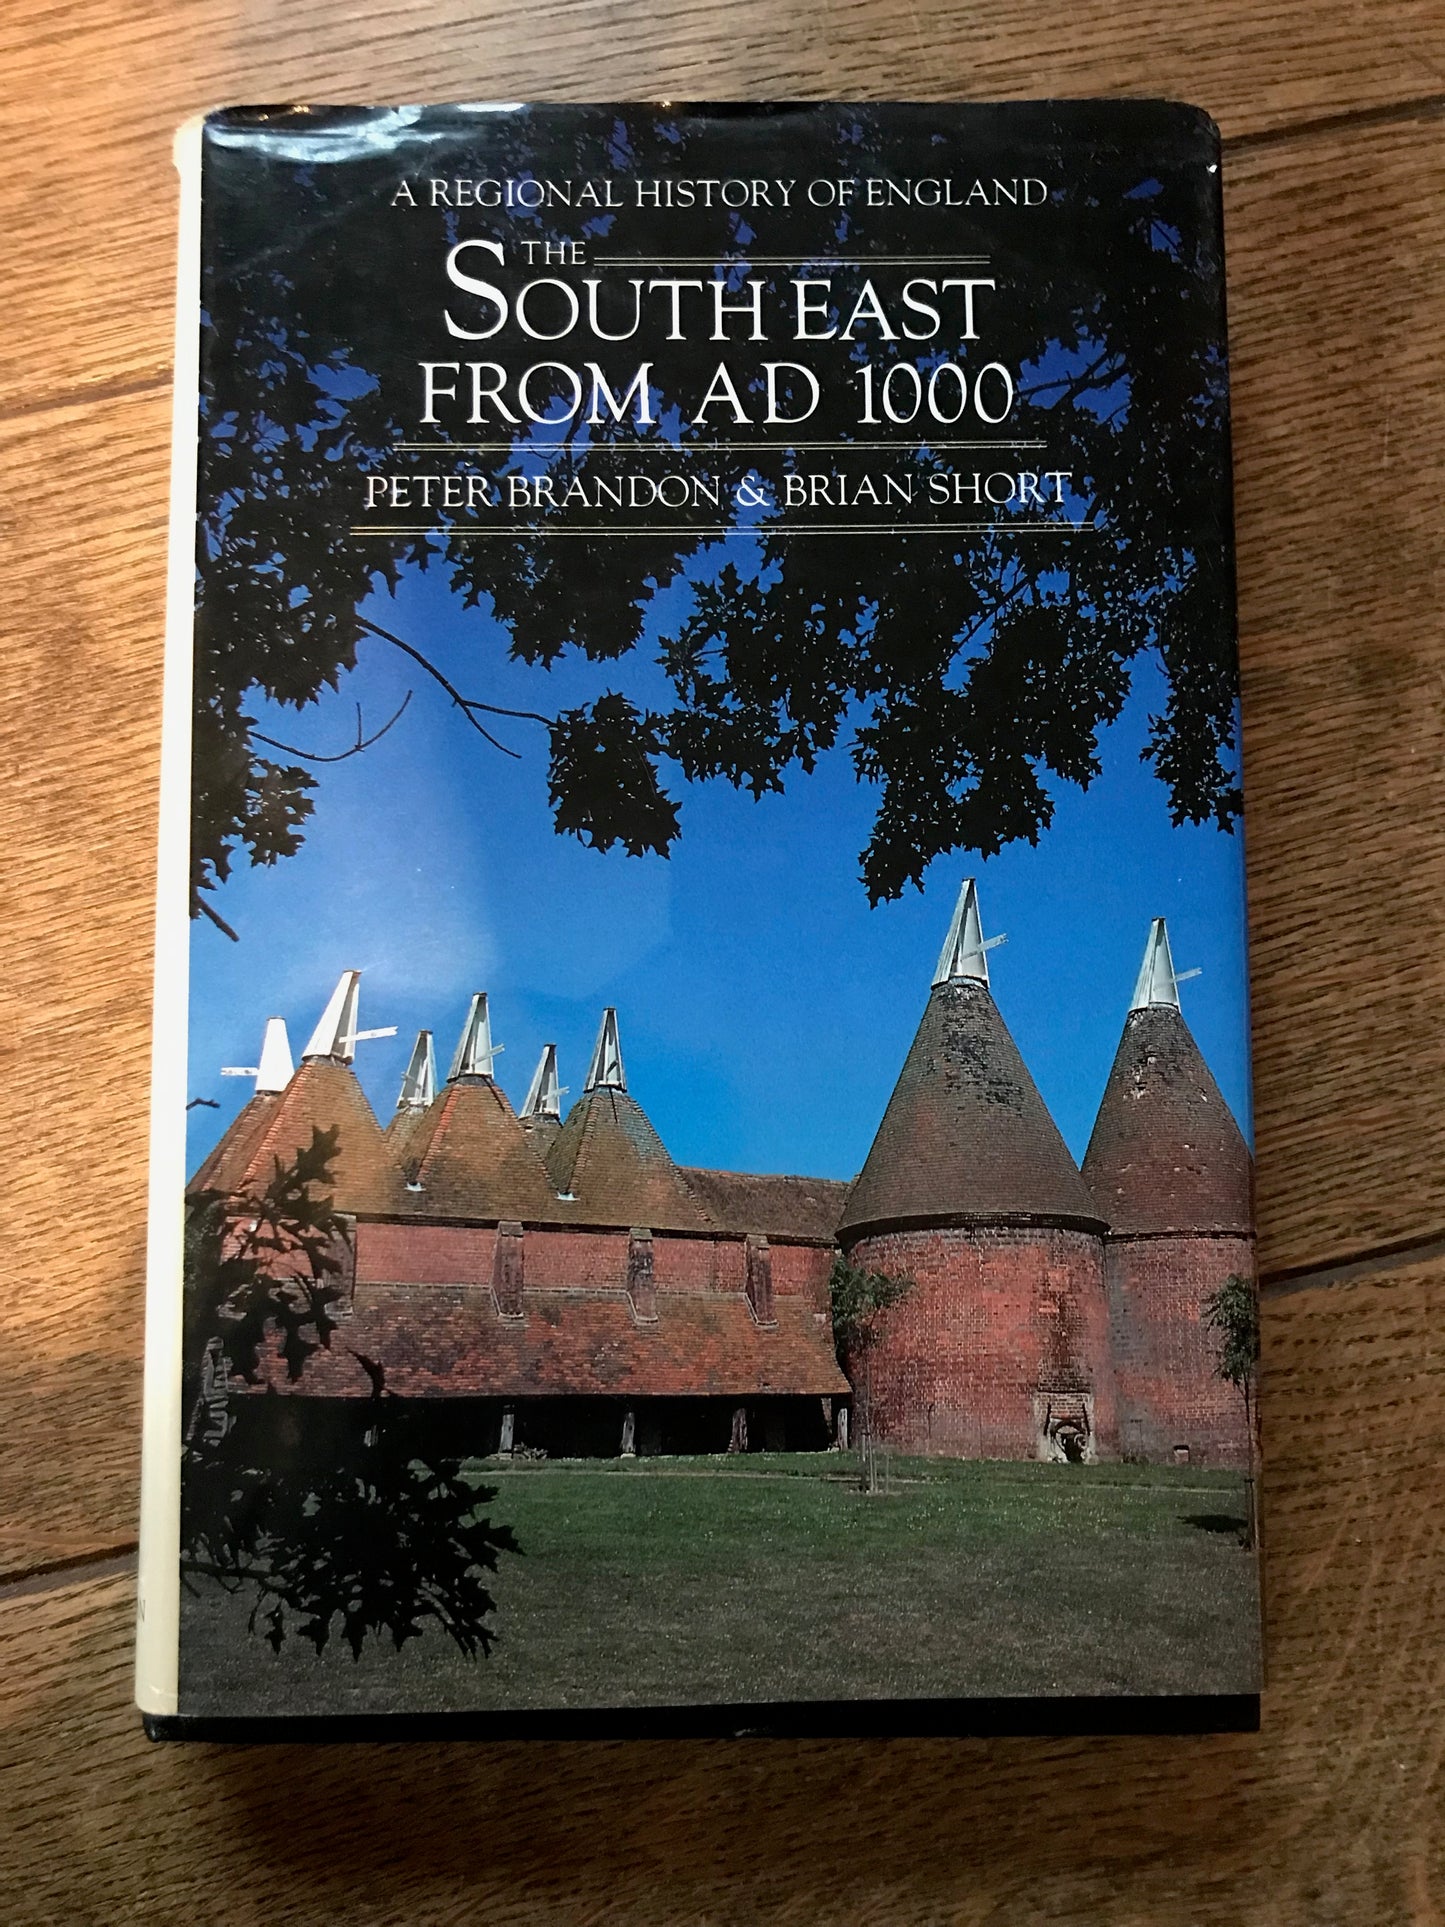 The South East from 1000 AD by Peter Brandon and Brian Short